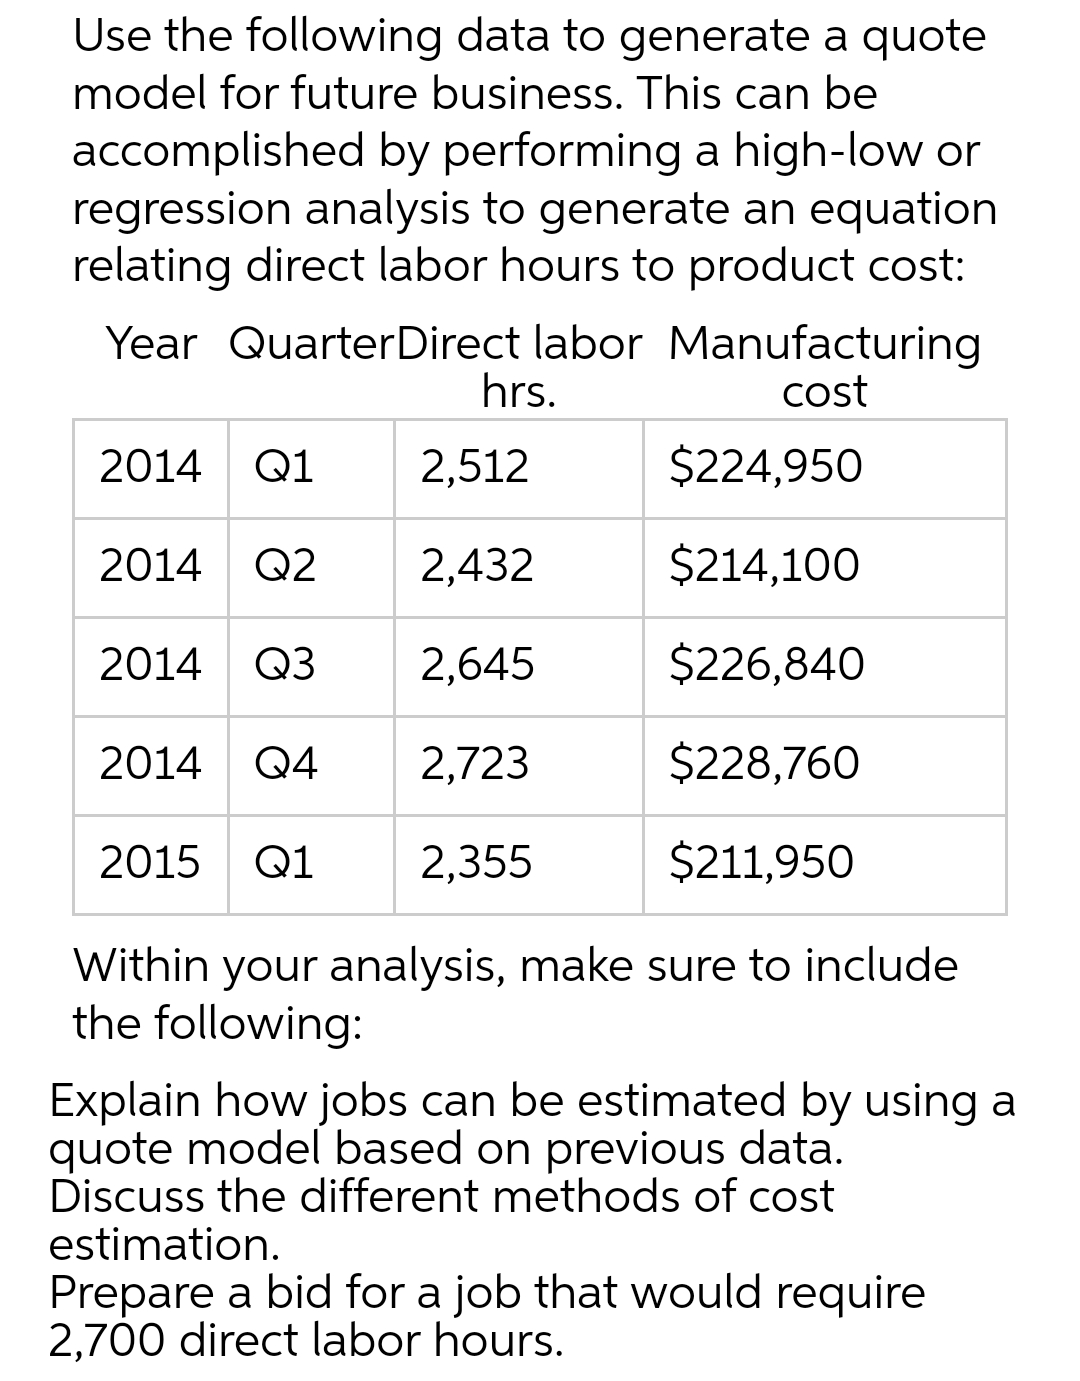 Use the following data to generate a quote
model for future business. This can be
accomplished by performing a high-low or
regression analysis to generate an equation
relating direct labor hours to product cost:
Year Quarter Direct labor Manufacturing
hrs.
cost
2014 Q1
2,512
$224,950
2014 Q2 2,432
$214,100
2014 Q3 2,645
$226,840
2014 Q4
2,723
$228,760
2015 Q1
2,355
$211,950
Within your analysis, make sure to include
the following:
Explain how jobs can be estimated by using a
quote model based on previous data.
Discuss the different methods of cost
estimation.
Prepare a bid for a job that would require
2,700 direct labor hours.